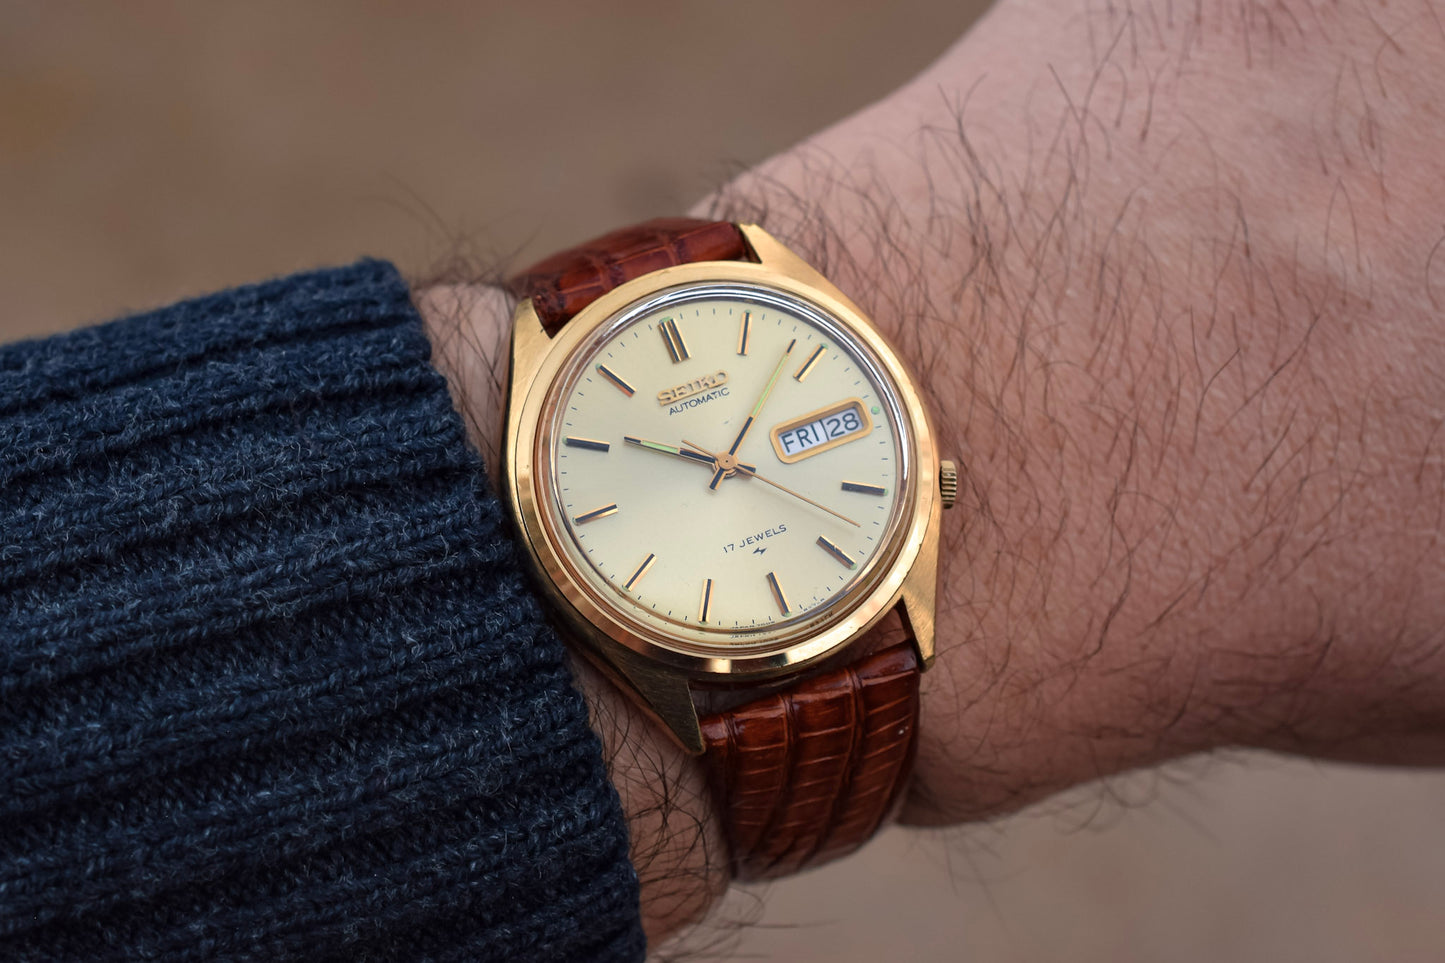 1980 Seiko Automatic Gold-Tone Day/Date Watch